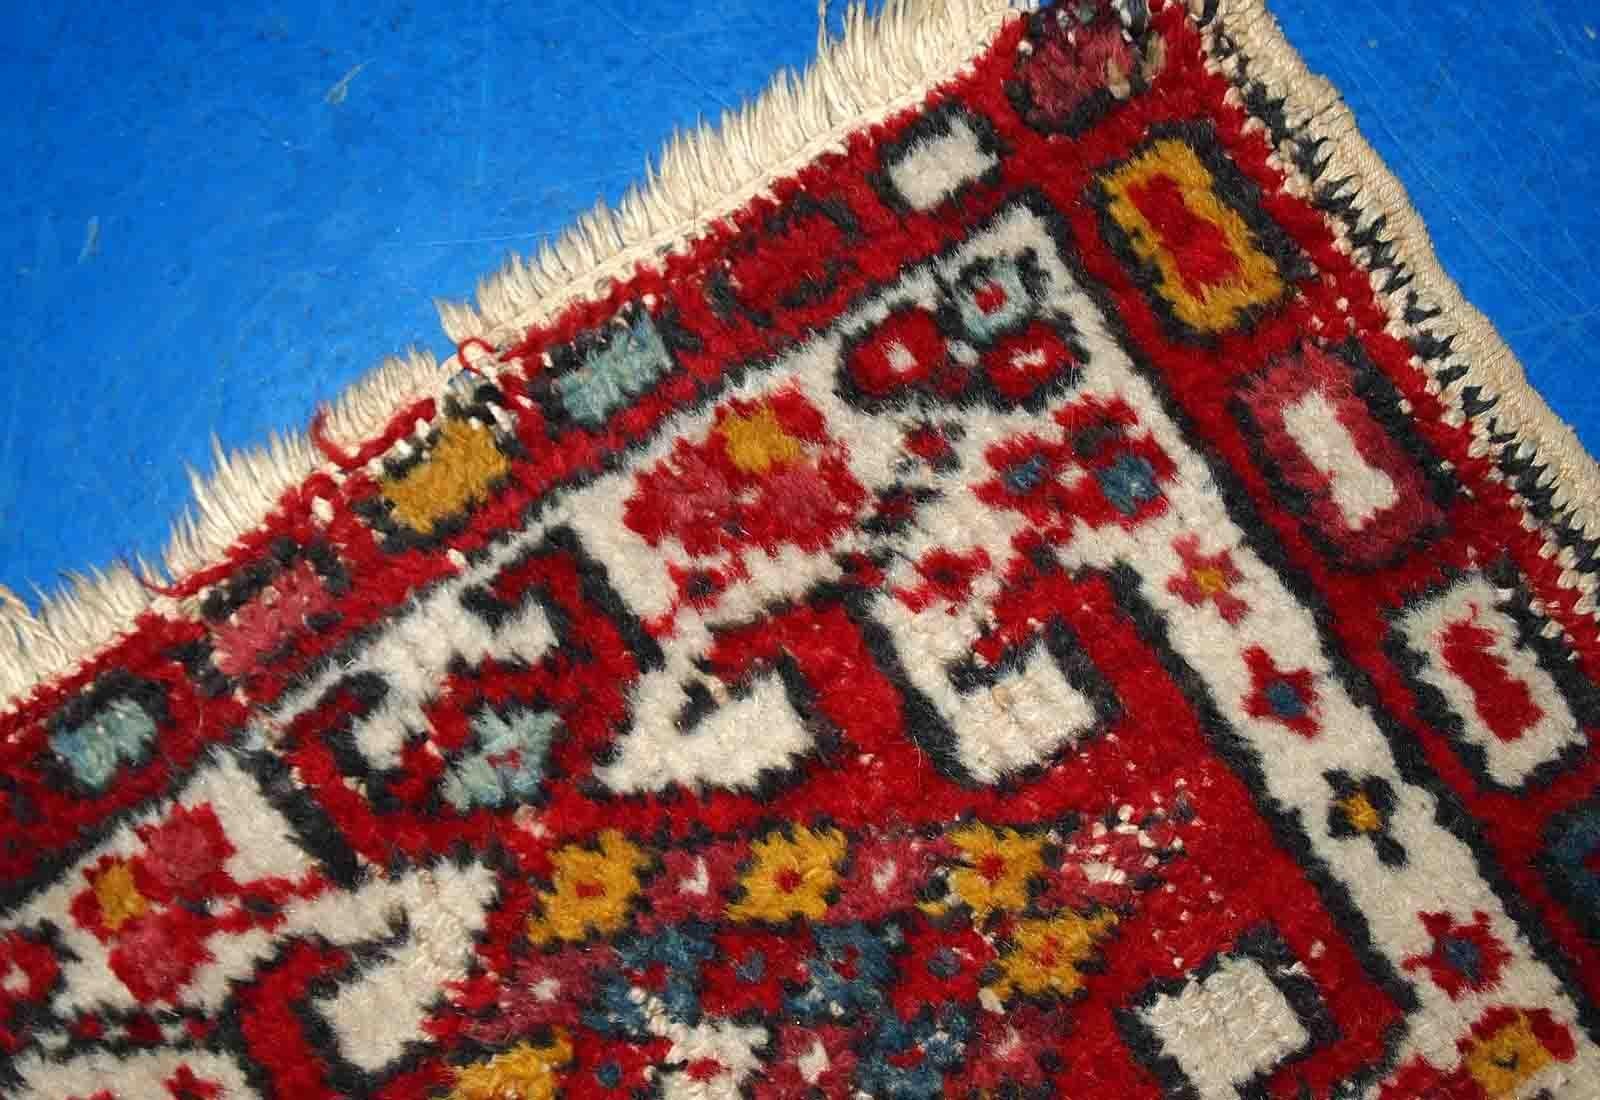 Vintage handmade Middle Eastern Hamadan mat in original condition, it has some age wear. The rug is from the end of 20th century in red and white colours.

-condition: original, some age wear,
?
-circa: 1970s,

-size: 1.7' x 2.4' (51cm x